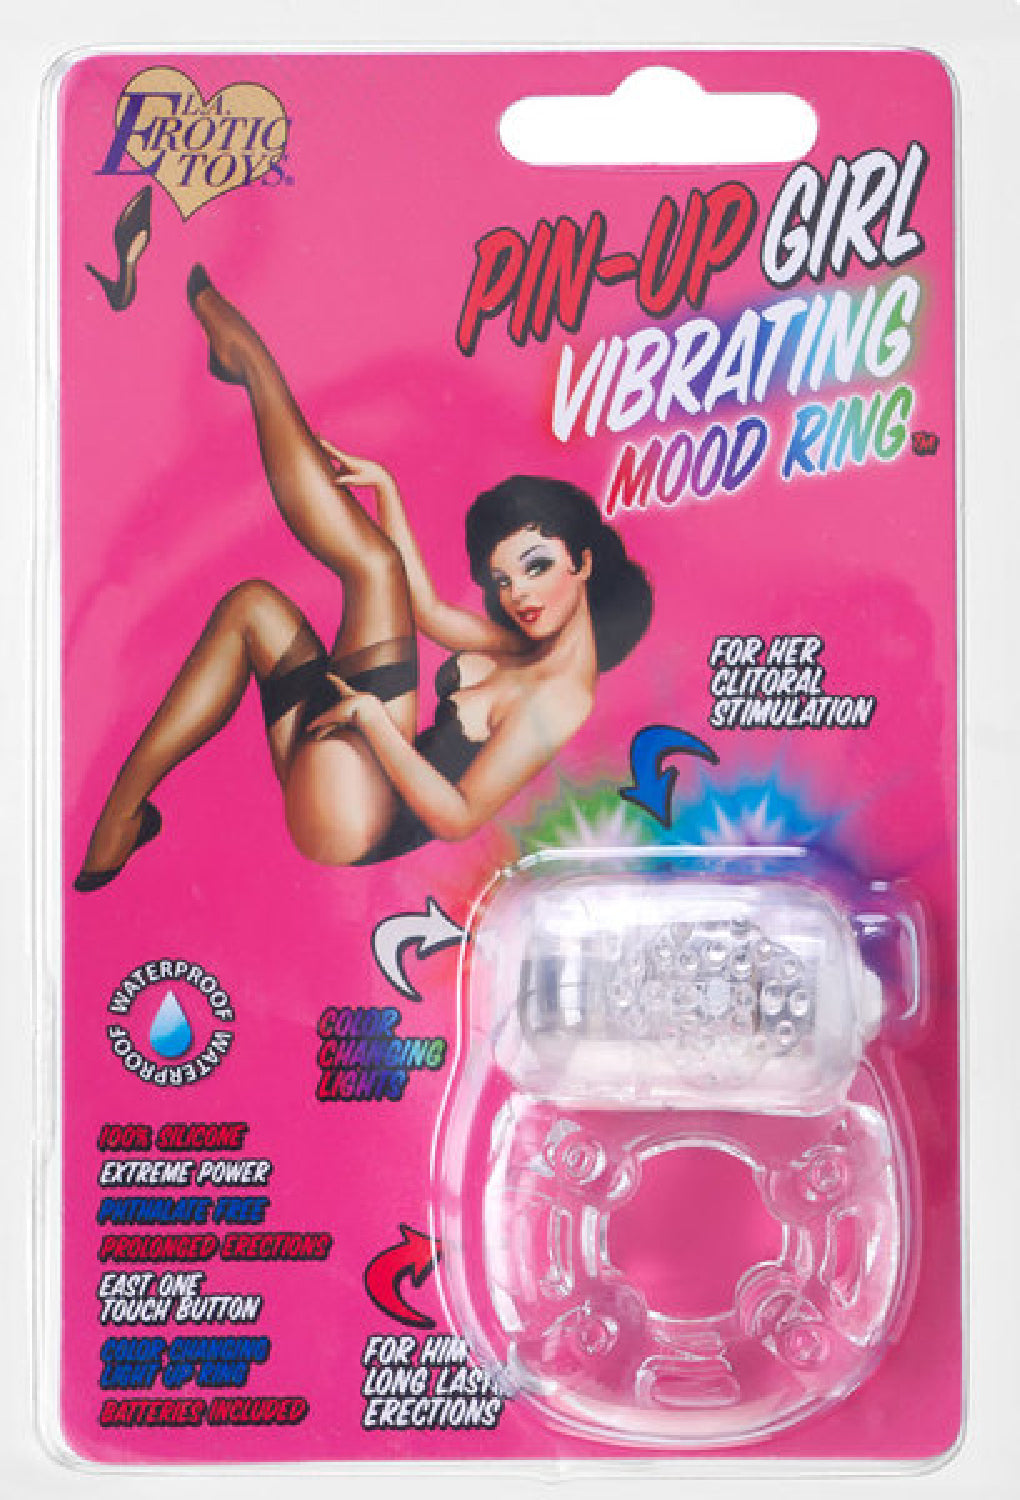 Pin-Up Girl Vibrating Mood Ring (Clear) Default Title - Club X